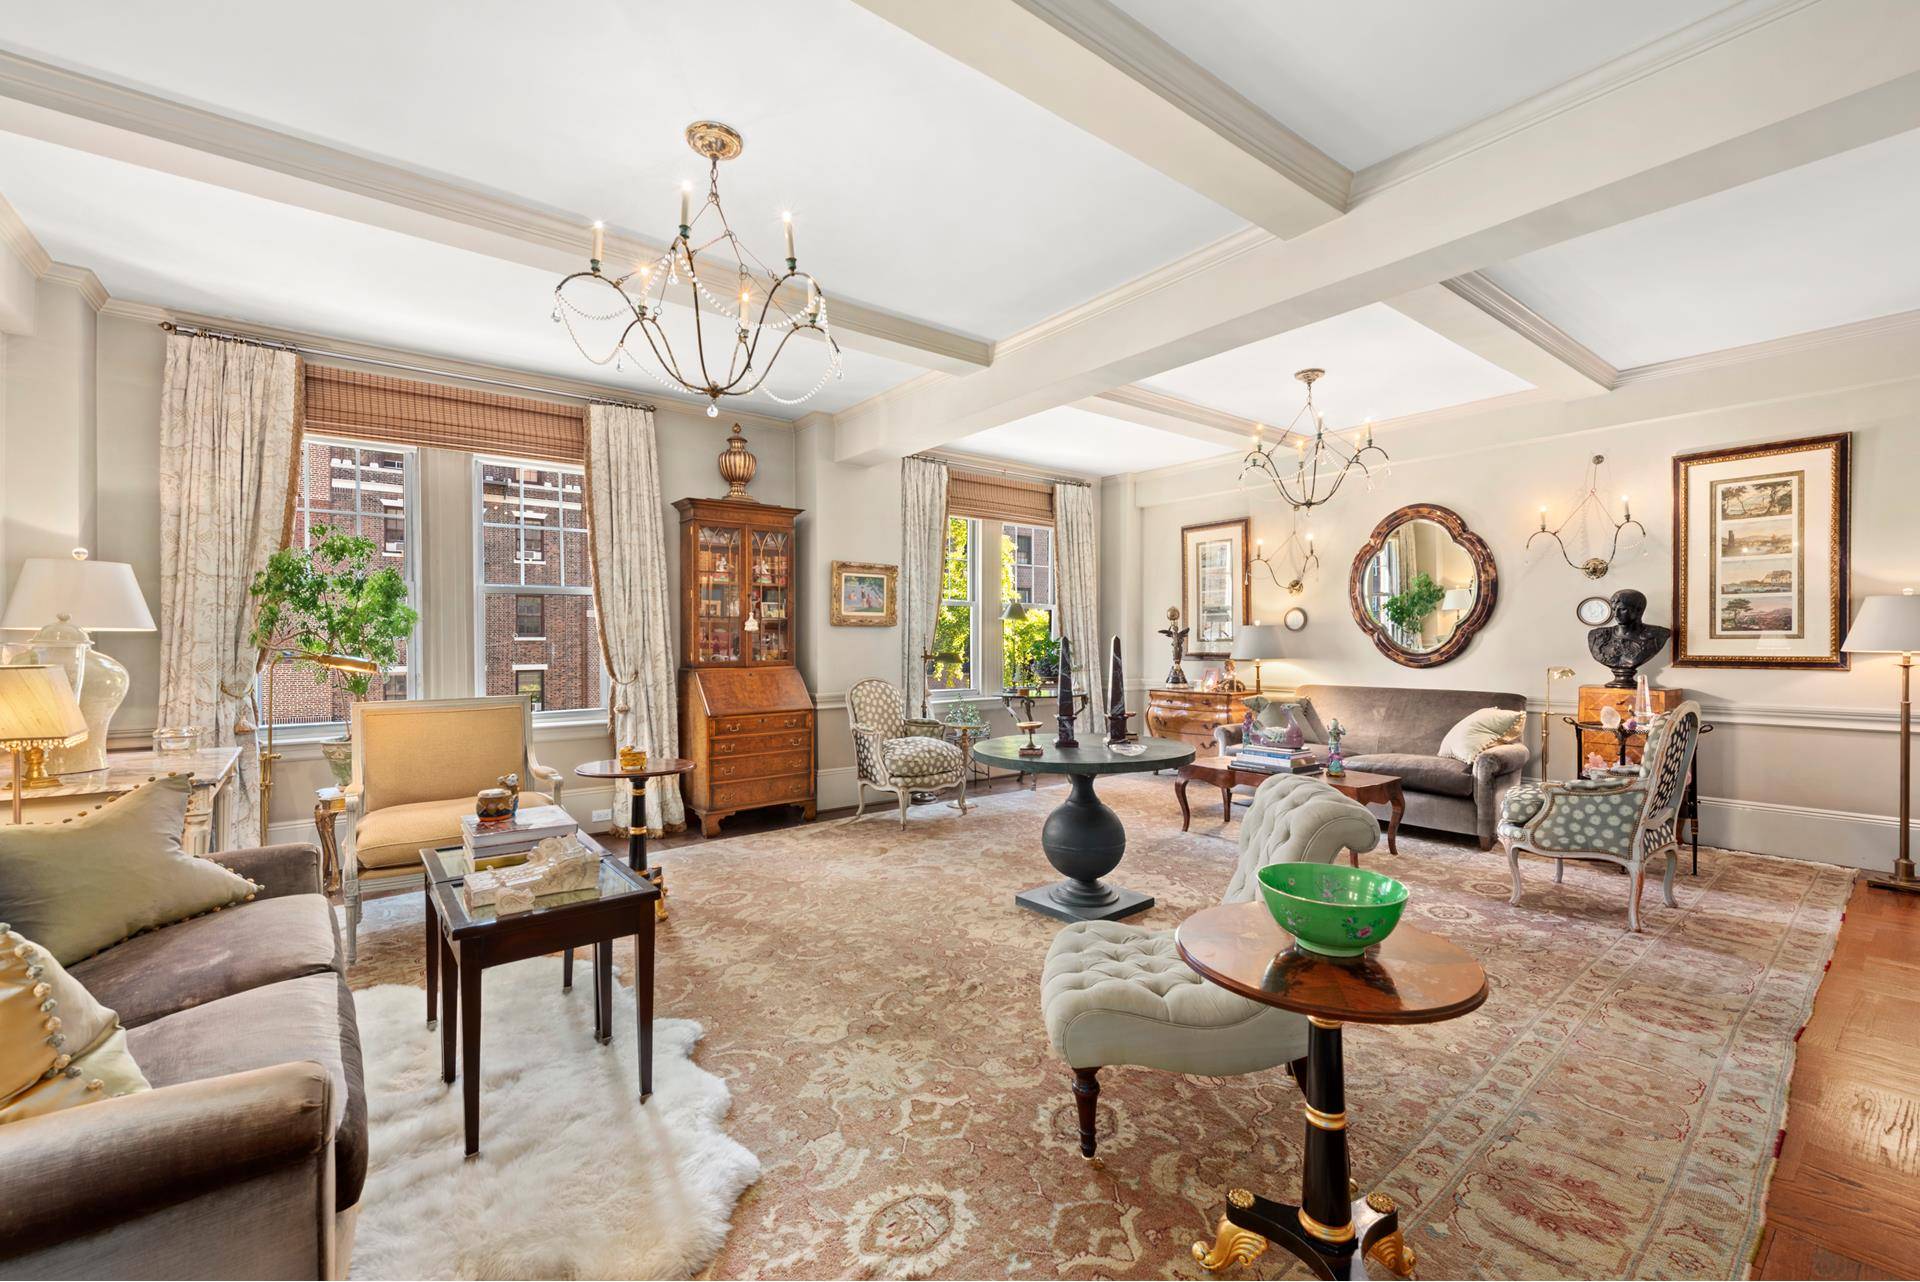 Apartment 5JK at 30 Fifth Avenue is a exceptionally elegant prewar residence located on lower Fifth Avenue in the heart of Greenwich Village.